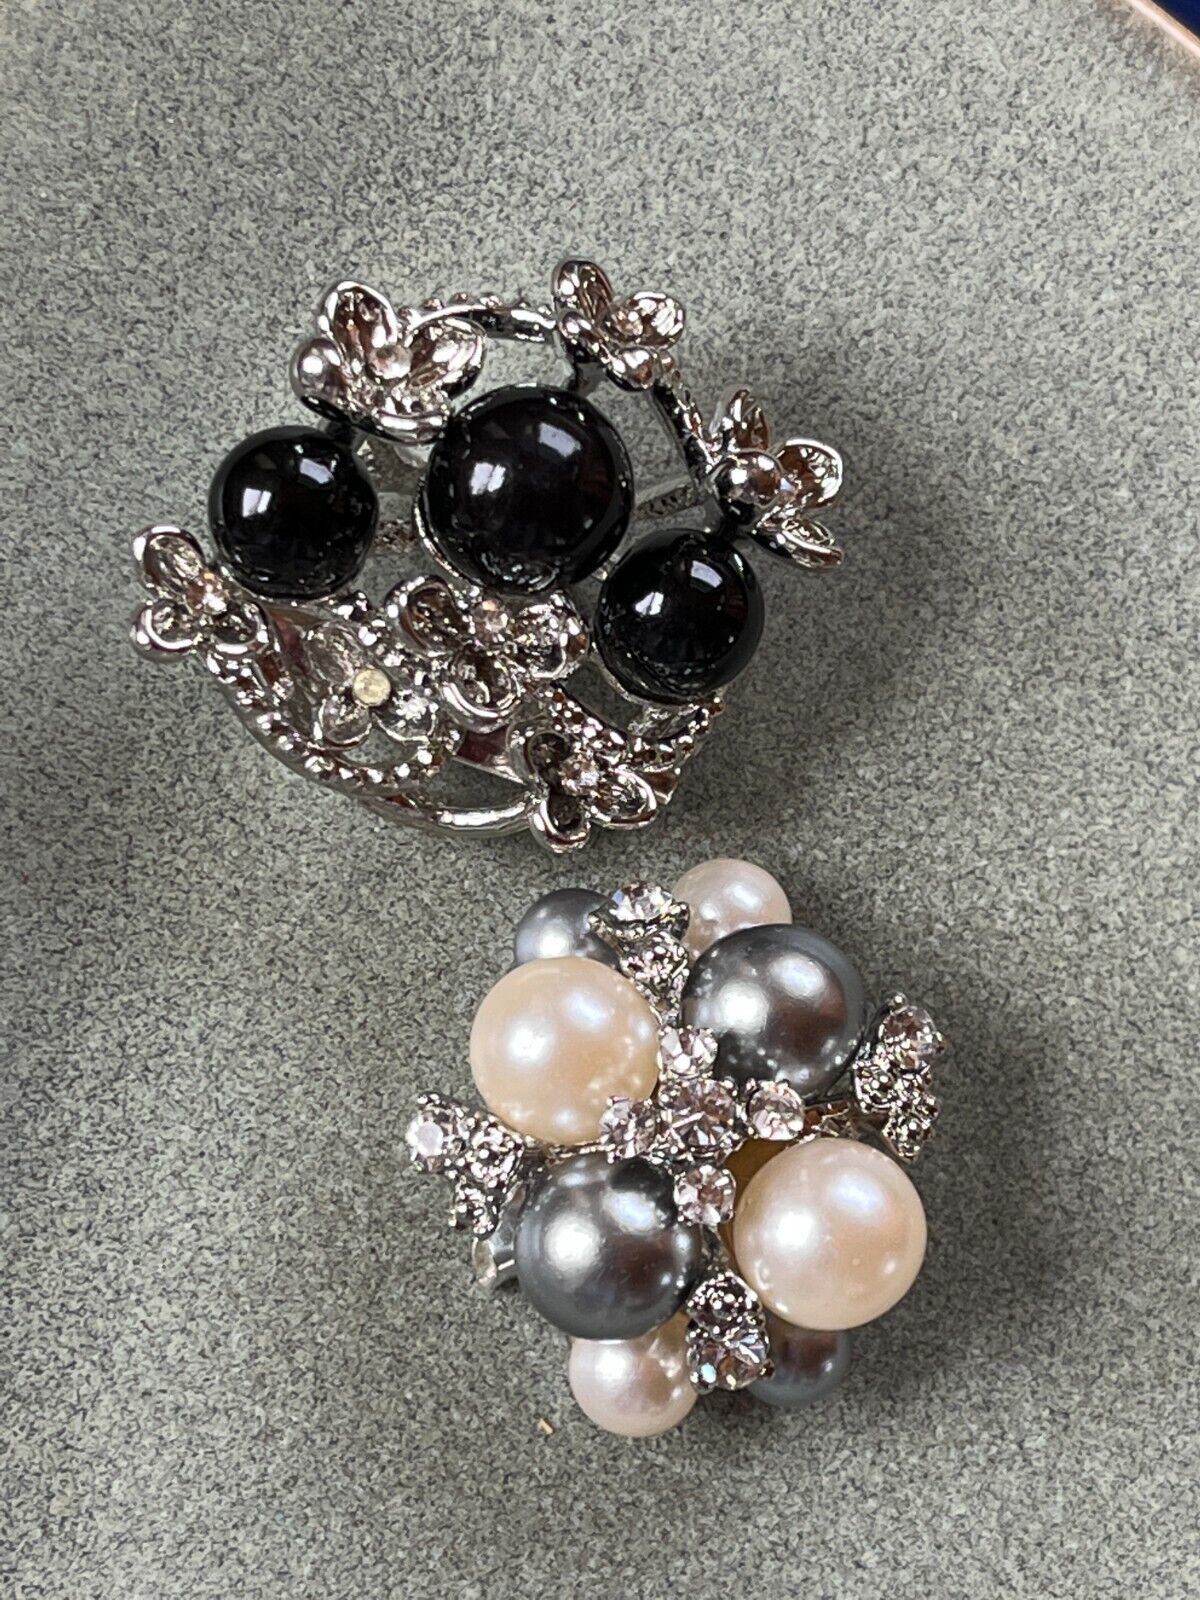 Primary image for Lot of Faux Gray & White Pearl Bead w Clear Rhinestone Accents Silvertone Cluste